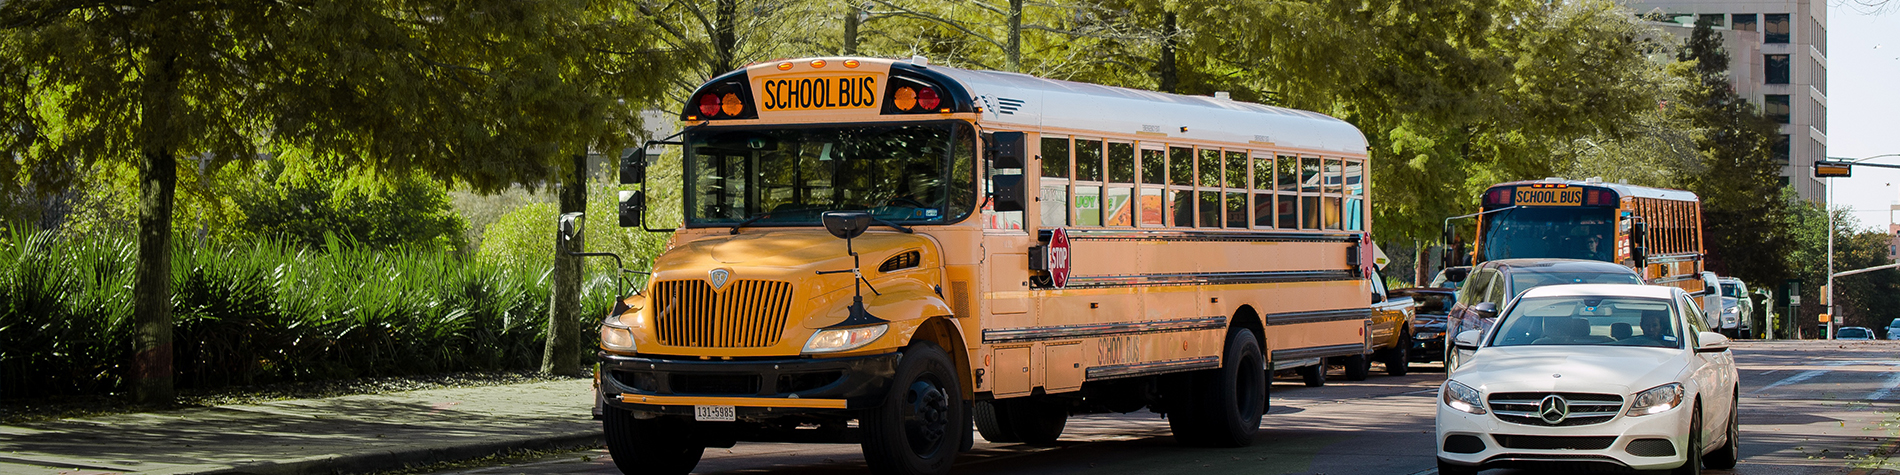 <p class="slider-title">2023-24 Transportation Service Levels and Fees | Apply by June 11</p><div class="banner-line"></div><p class="slider-subtitle">Families must register by June 11 to be  to routes of the start of the next school year.</p> <a style="pointer-events:all" class=AEBannerMoreLink href="https://www.cbe.ab.ca/news-centre/Pages/2023-24-transportation-service-levels-and-fees.aspx">Read More</a>